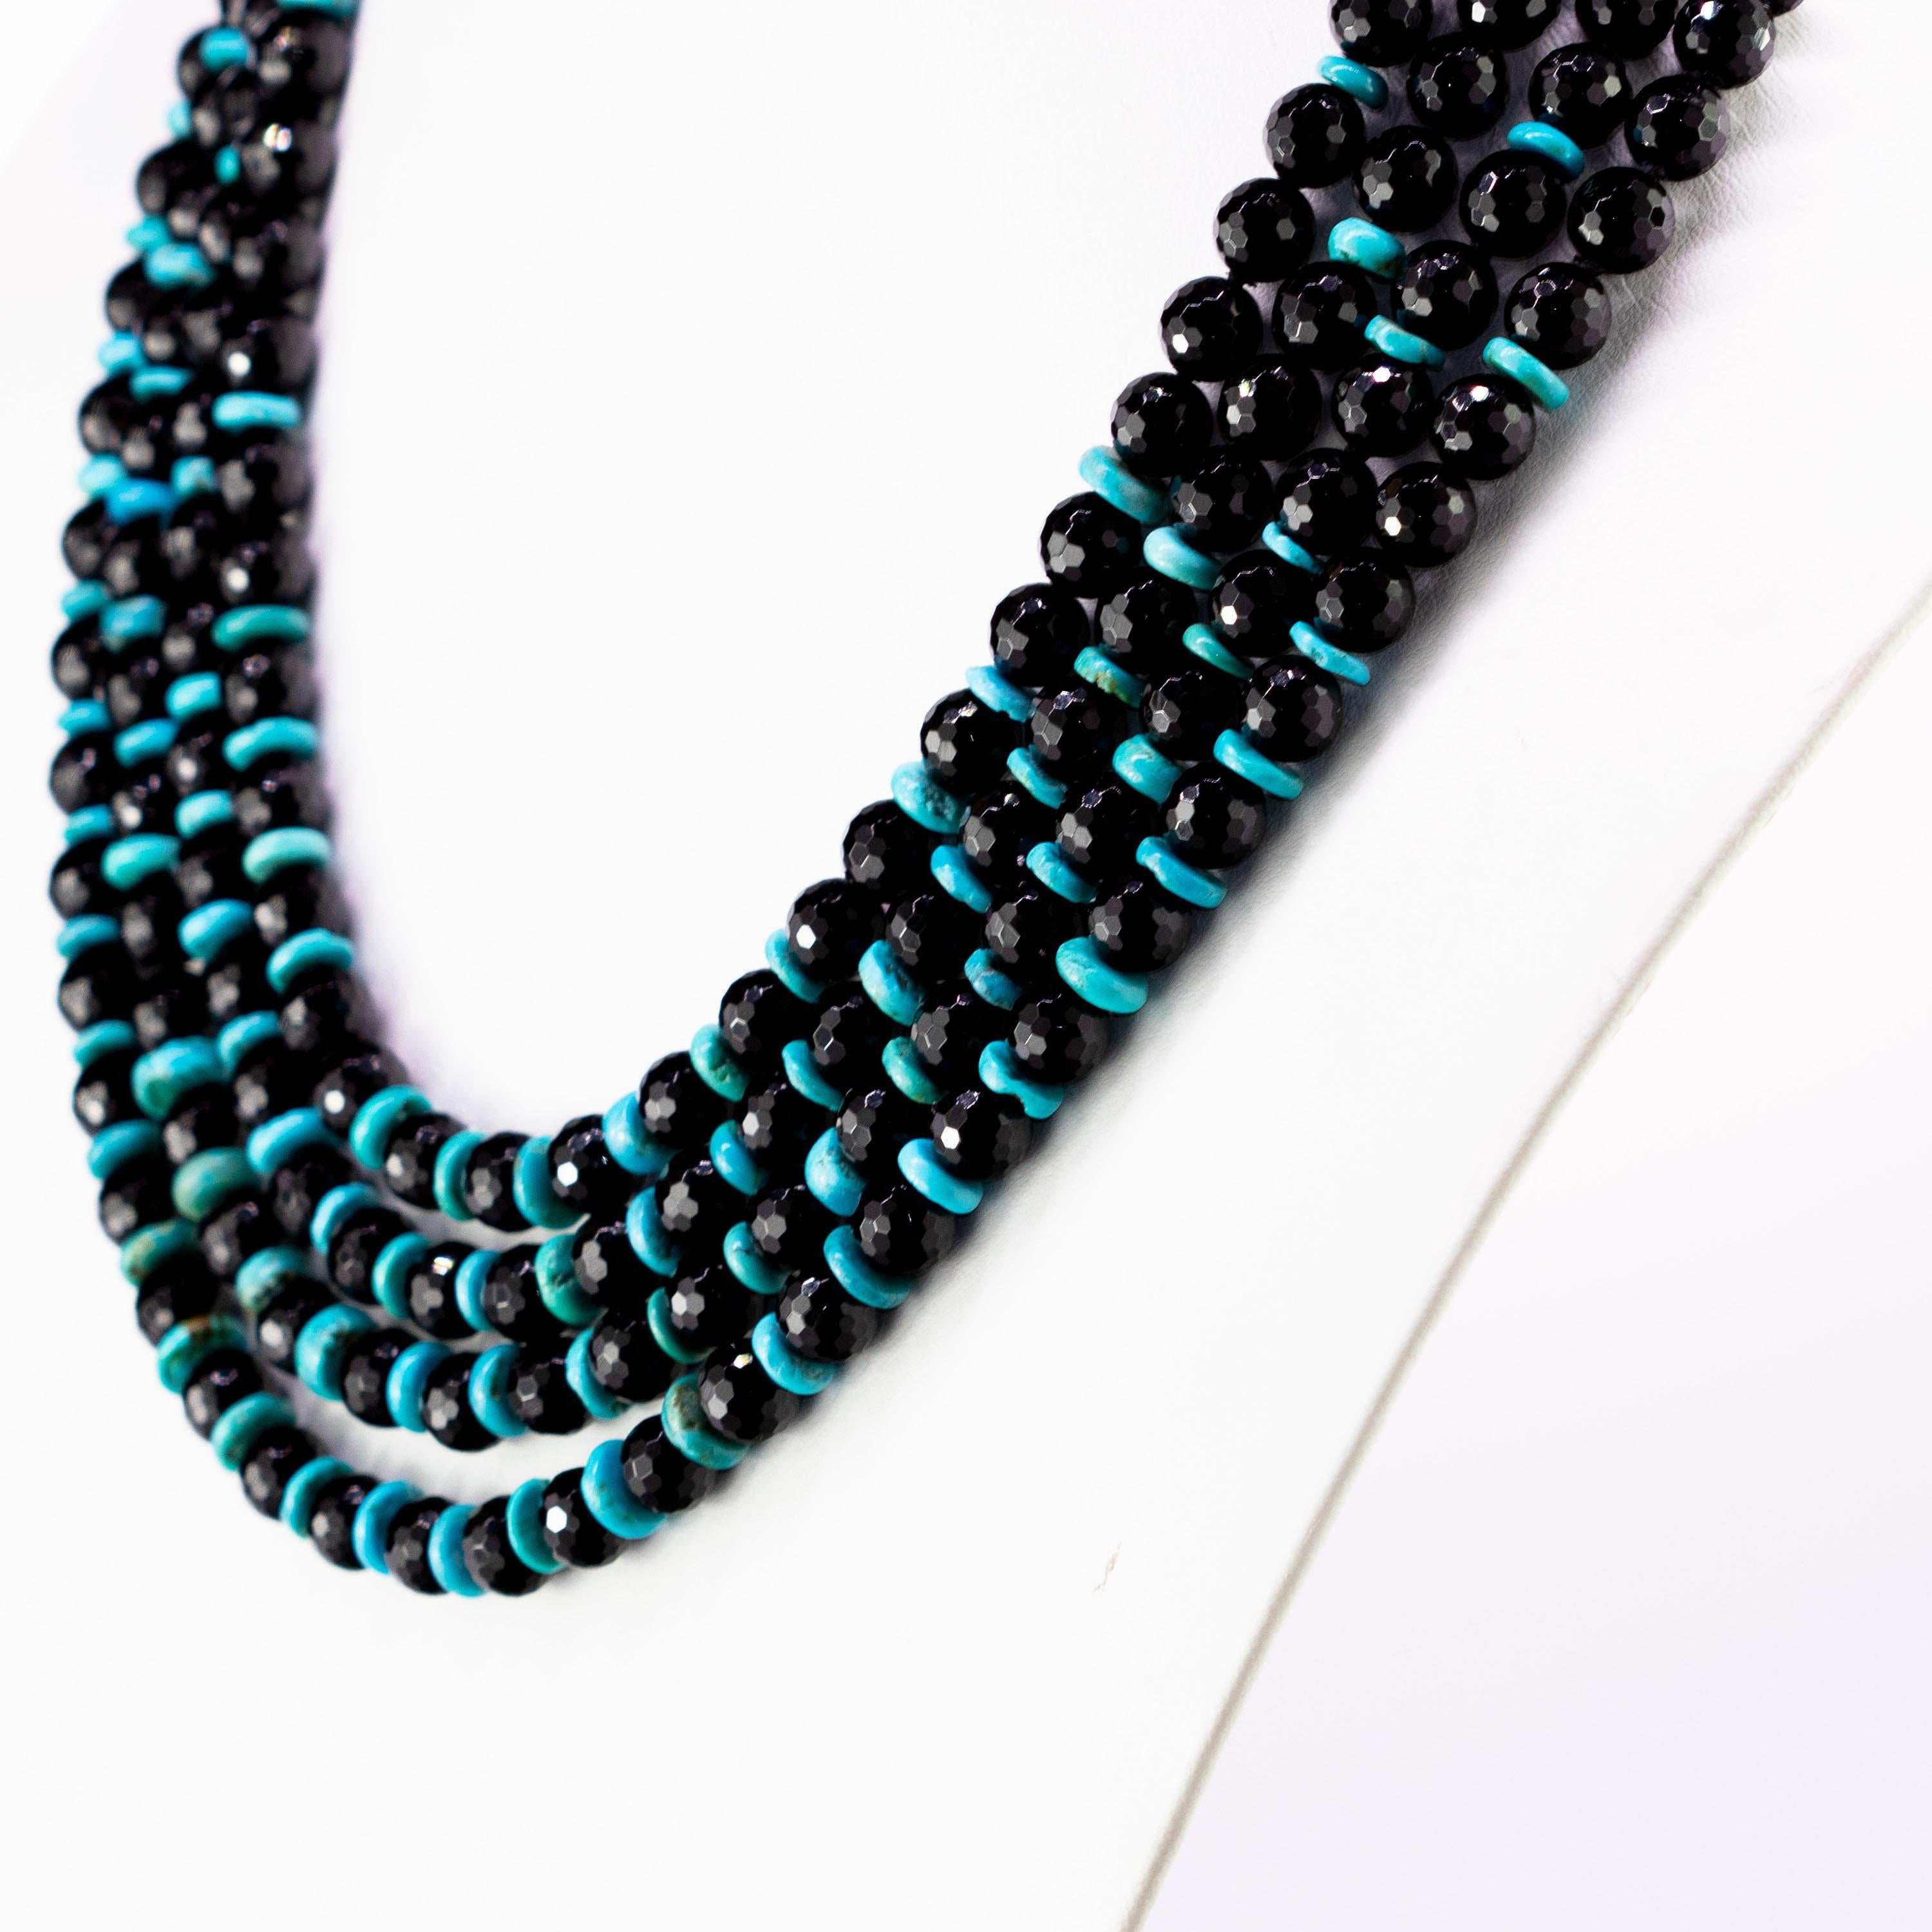 Abstract designs and dramatic contrasting colors is what you can find in this stunning necklace. Faceted black agate strands embellished with light-blue turquoises.

The turquoise has been used as a valuable ornament for ages. Its name is related to